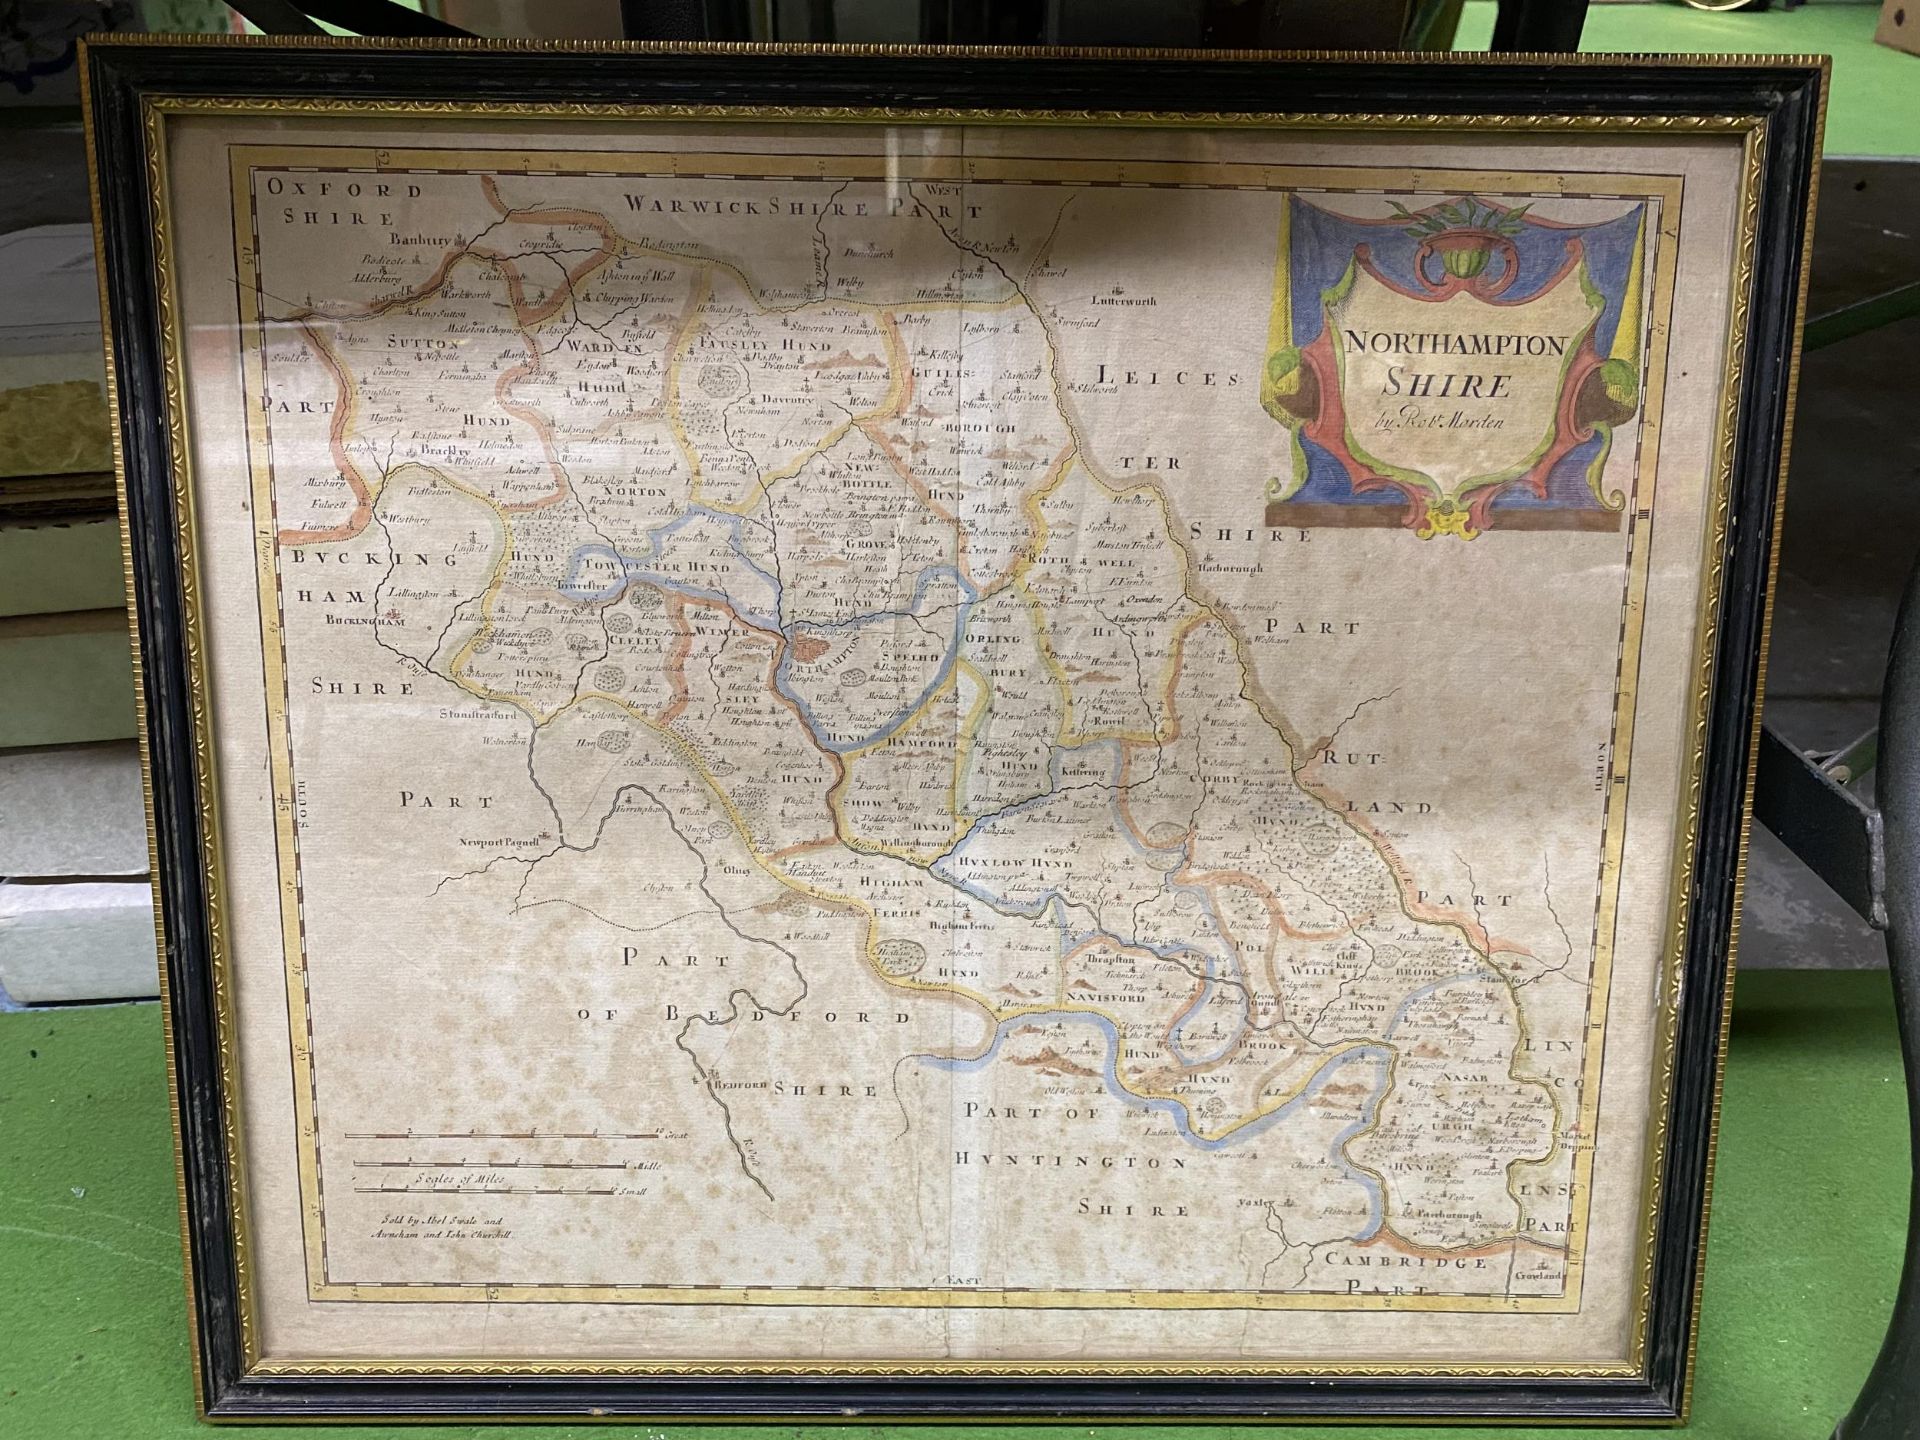 A FRAMED VINTAGE MAP OF NORTHAMPTONSHIRE PLUS TWO MOUNTED UNFRAMED MAPS OF CAPE DE VERDE - Image 4 of 4